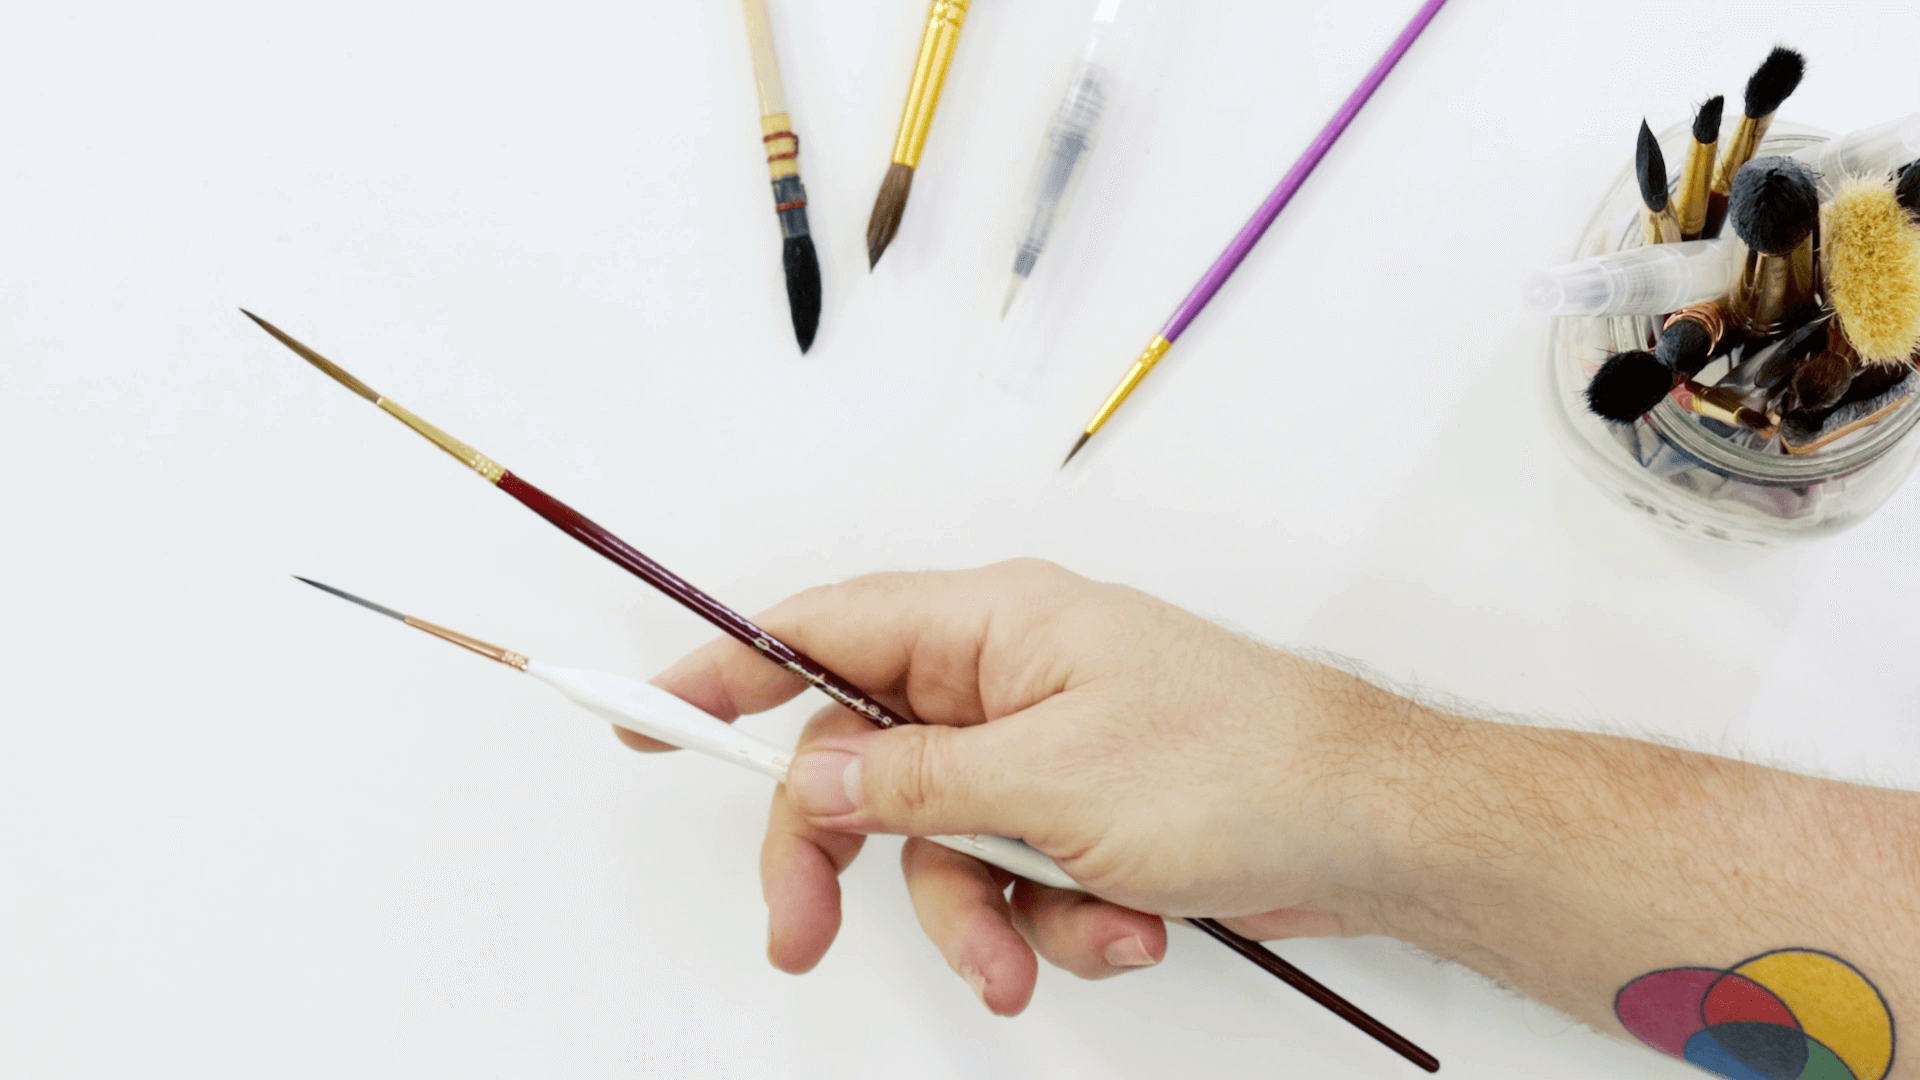 Hand holding two rigger watercolour brushes with several watercolour brushes around.